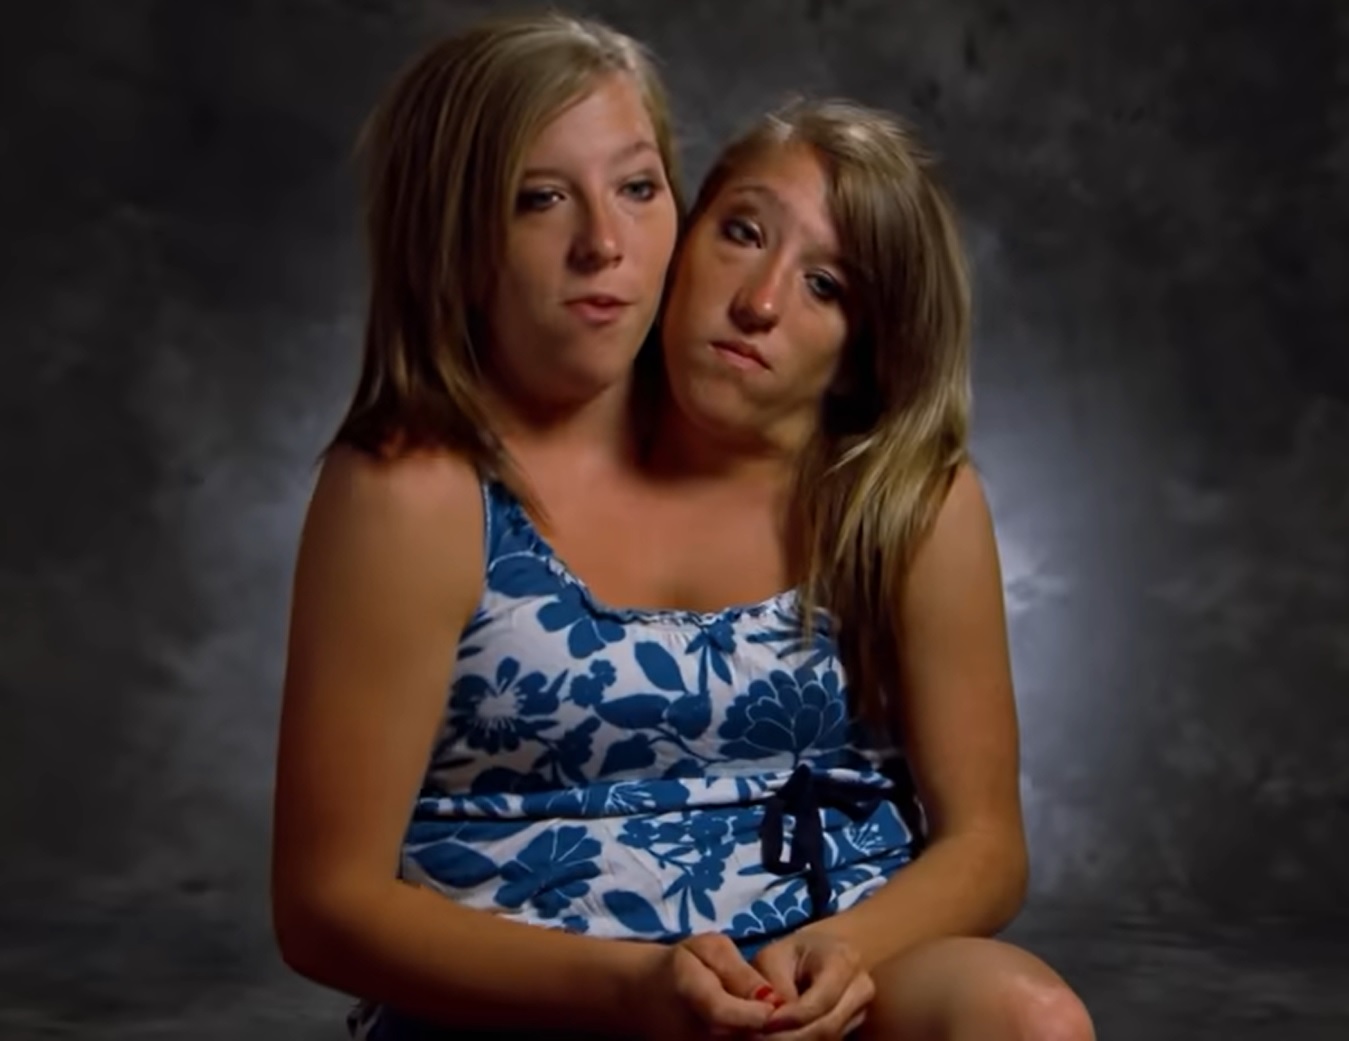 The Twins Who Share A Body: Watch story of Abigail and Brittany Hensel's  life